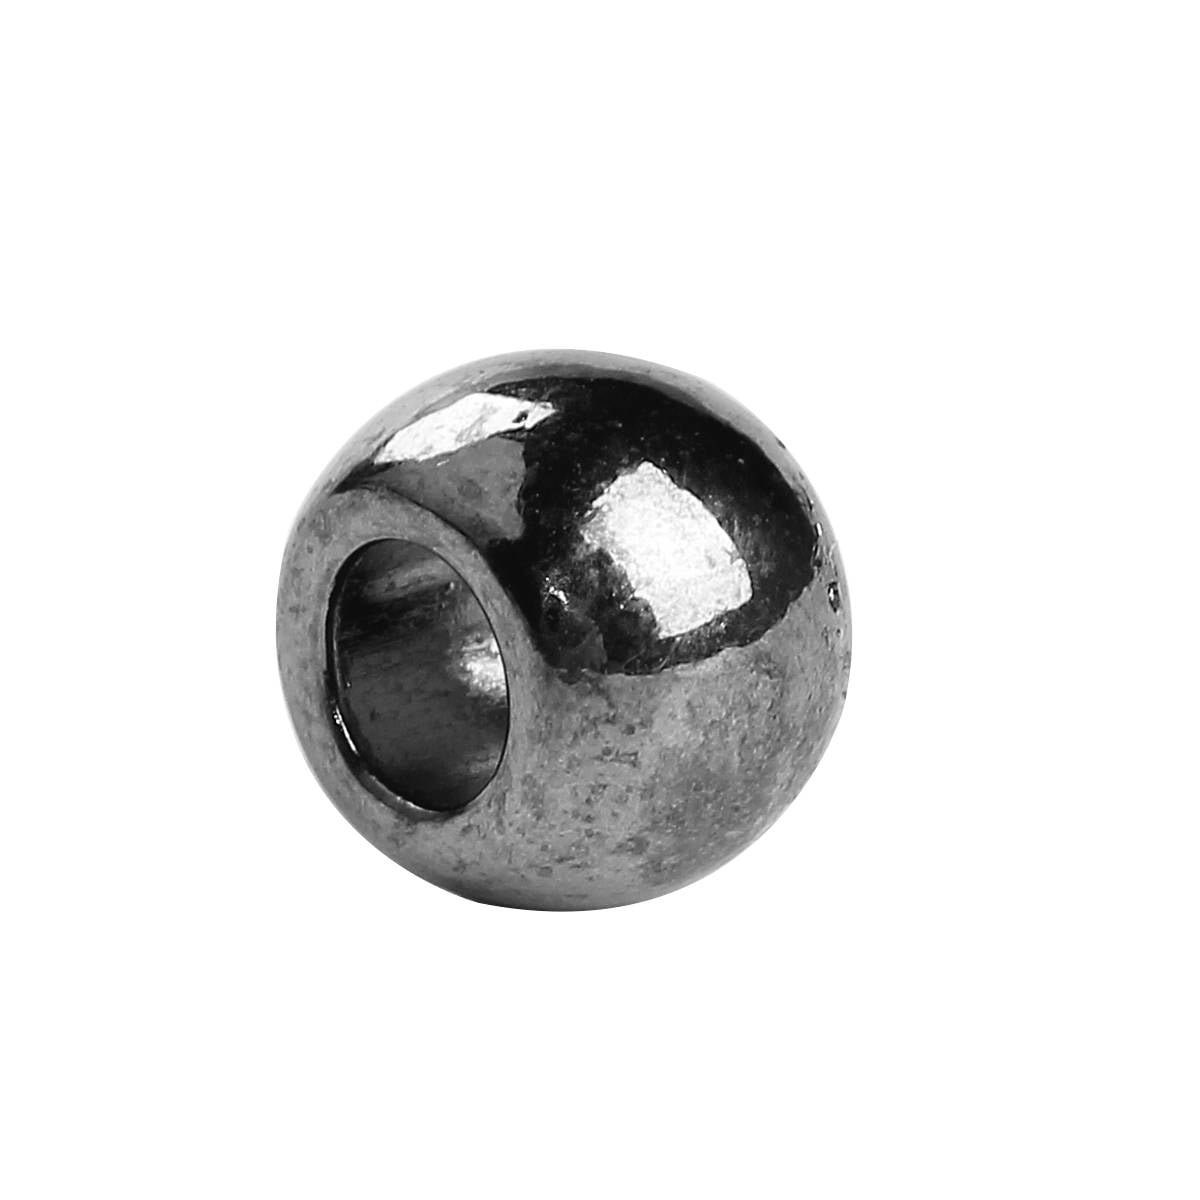 Large Hole Spacer Beads Metal Spacers Silver Spacer Beads Silver Spacers  Metal Beads 7x4mm 